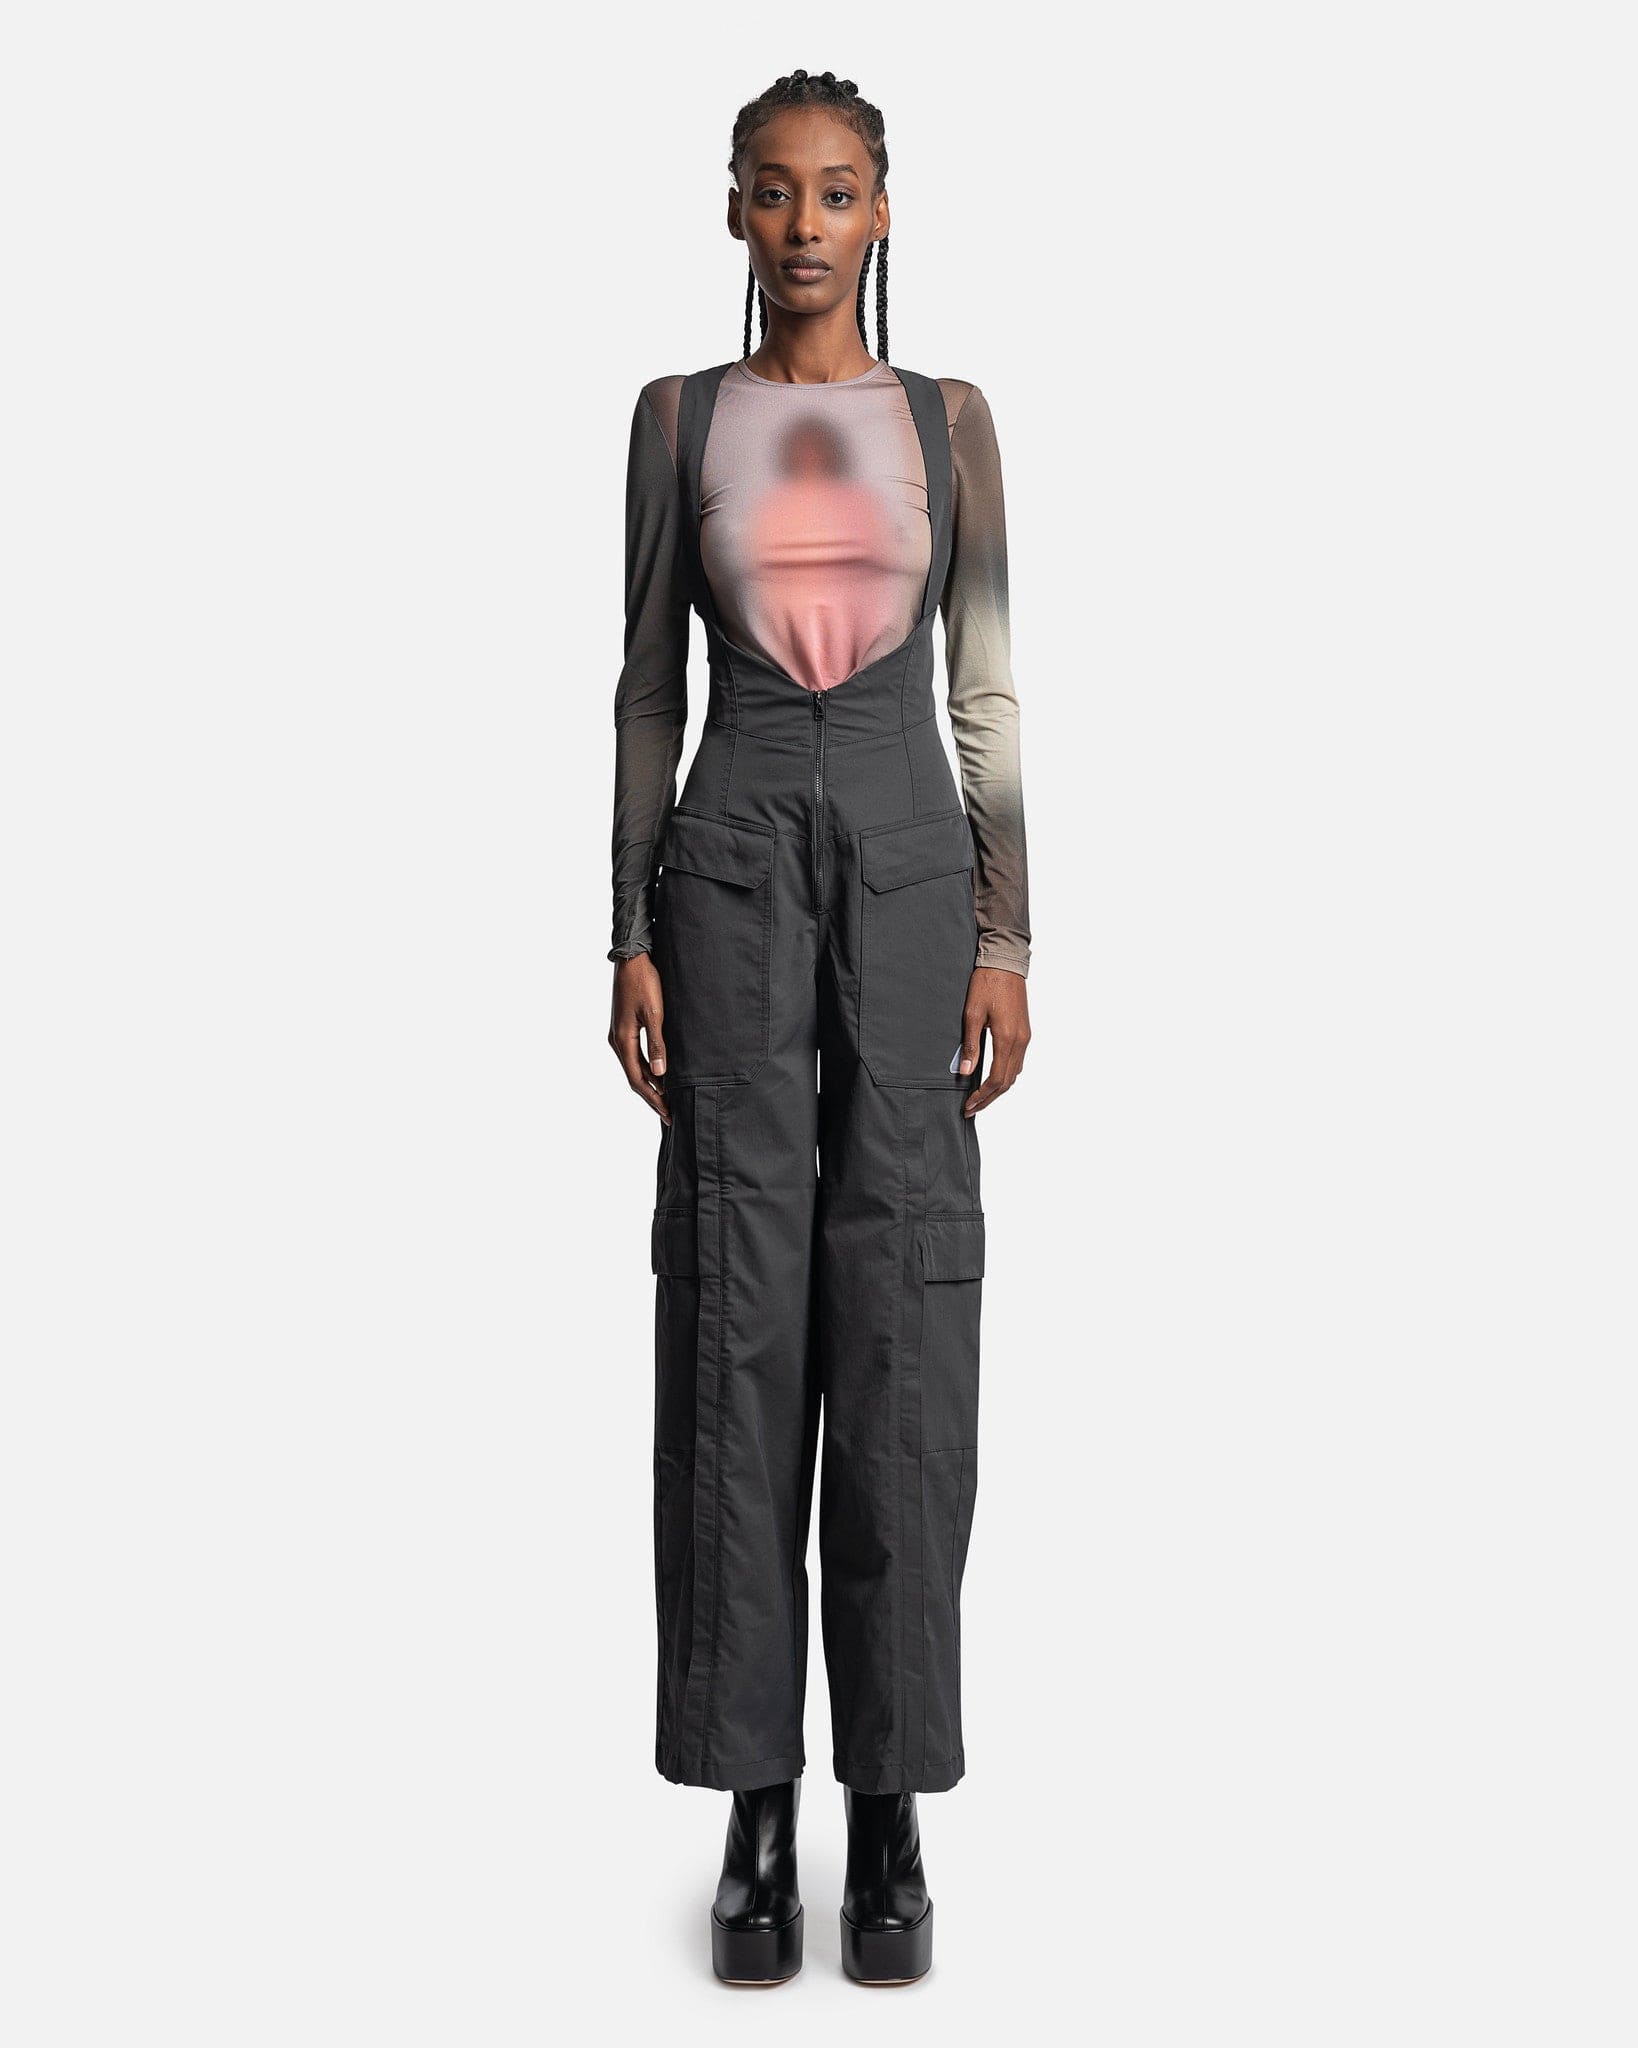 Nike 23 Engineered Chicago Corset Cutout Overalls in Black